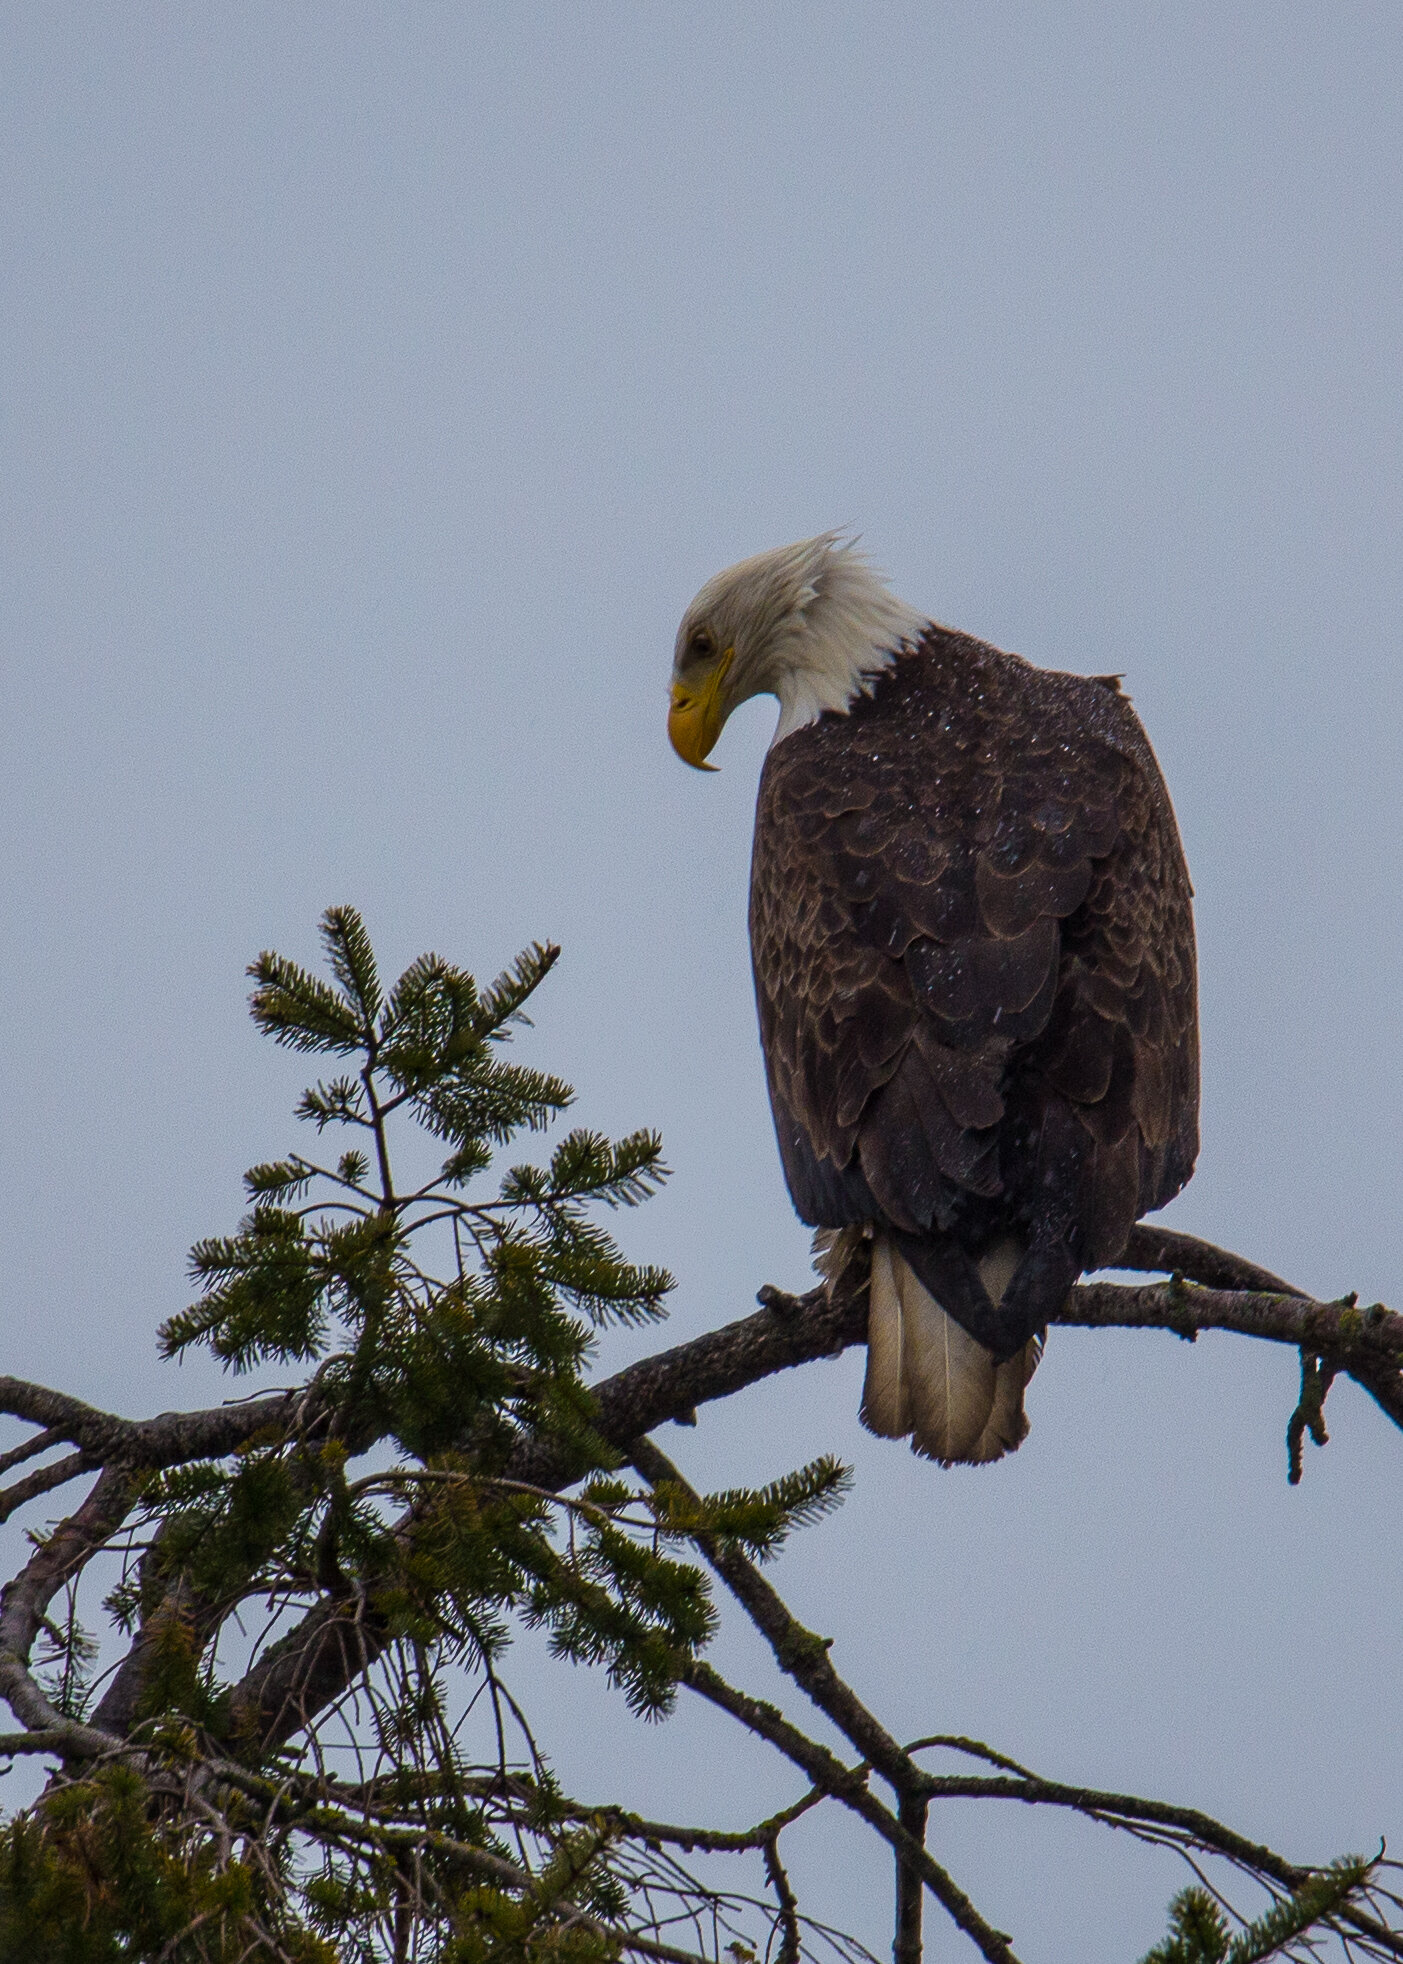  Bald eagle, looking for lunch. 